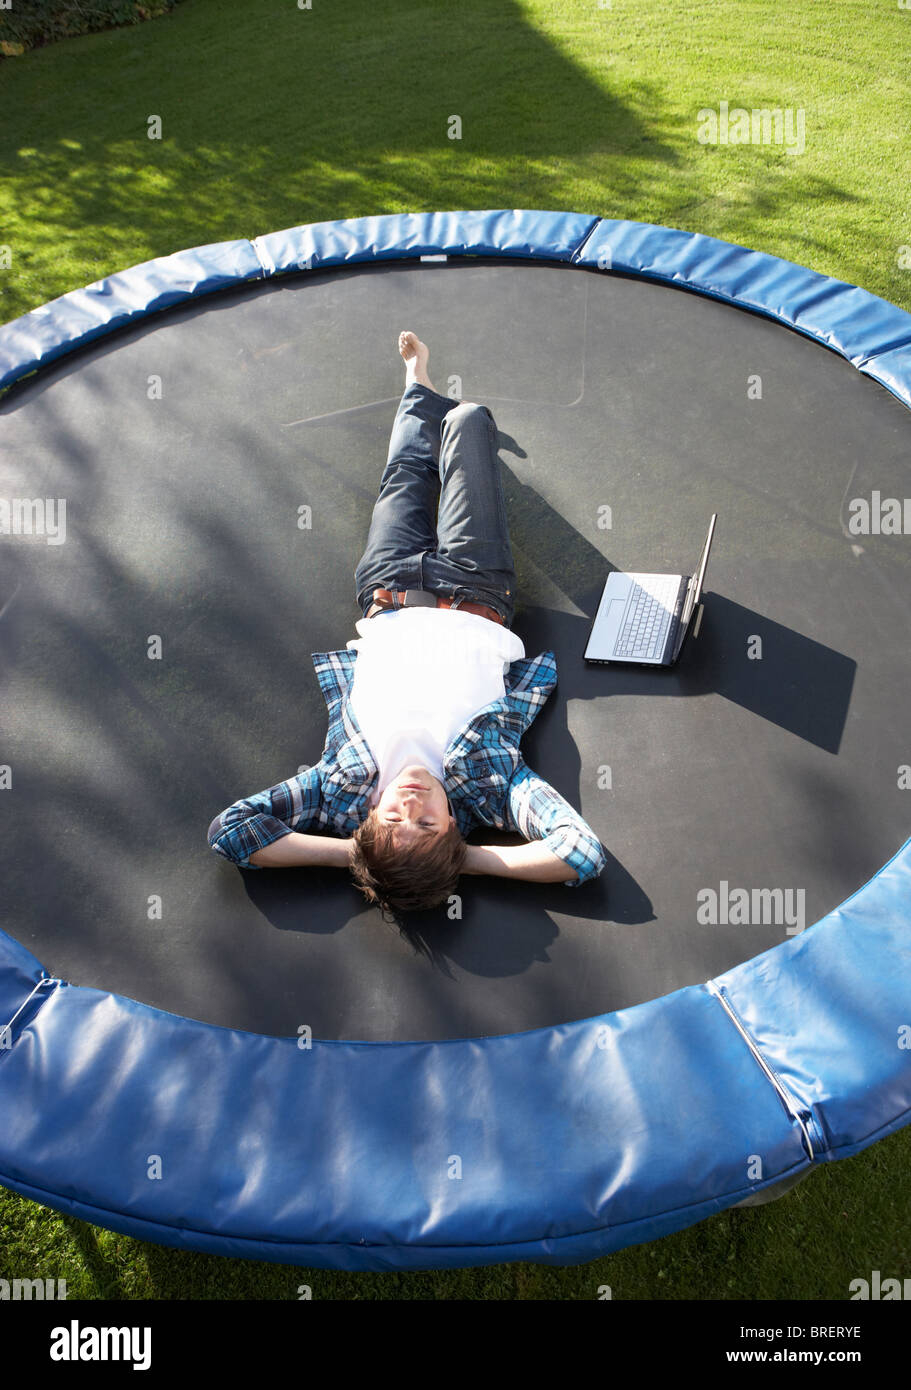 lede efter ortodoks Derfor Young Man Relaxing On Trampoline With Laptop Stock Photo - Alamy